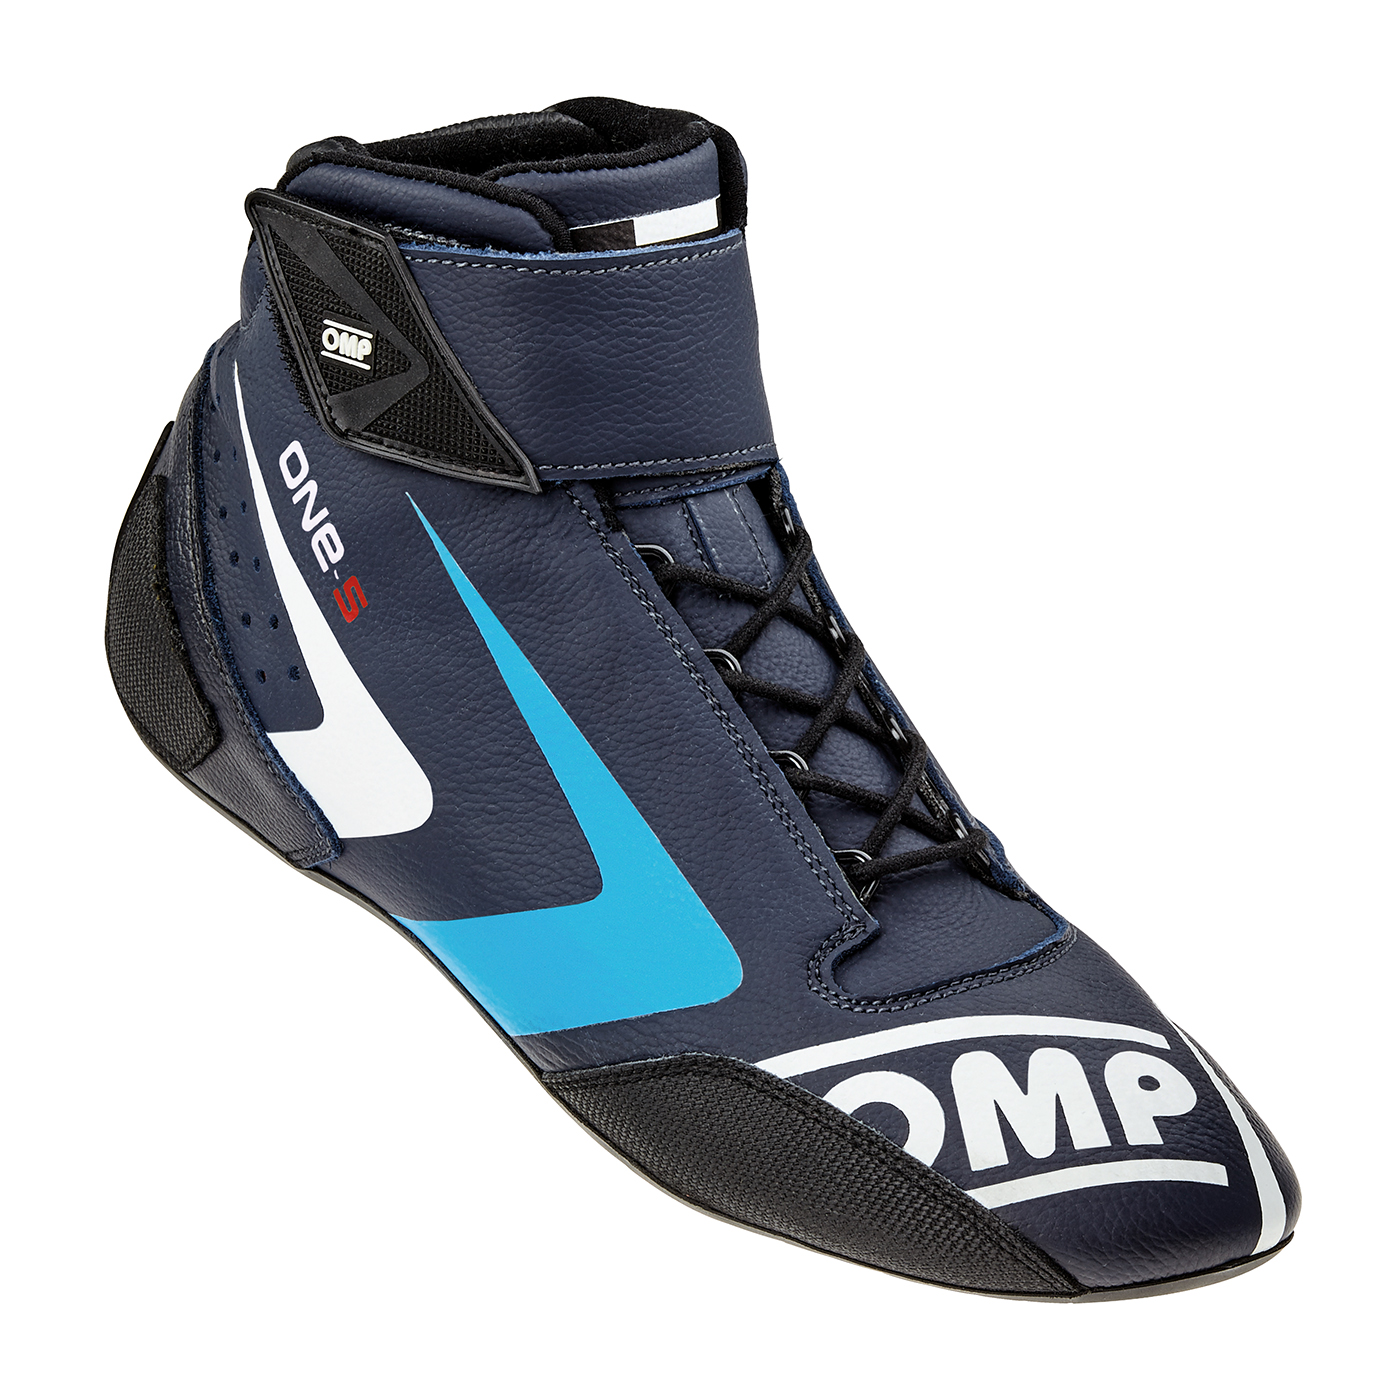 OMP One S Race Boots | OMP FIA 8856-2000 Rally Boots | Professional Mid ...